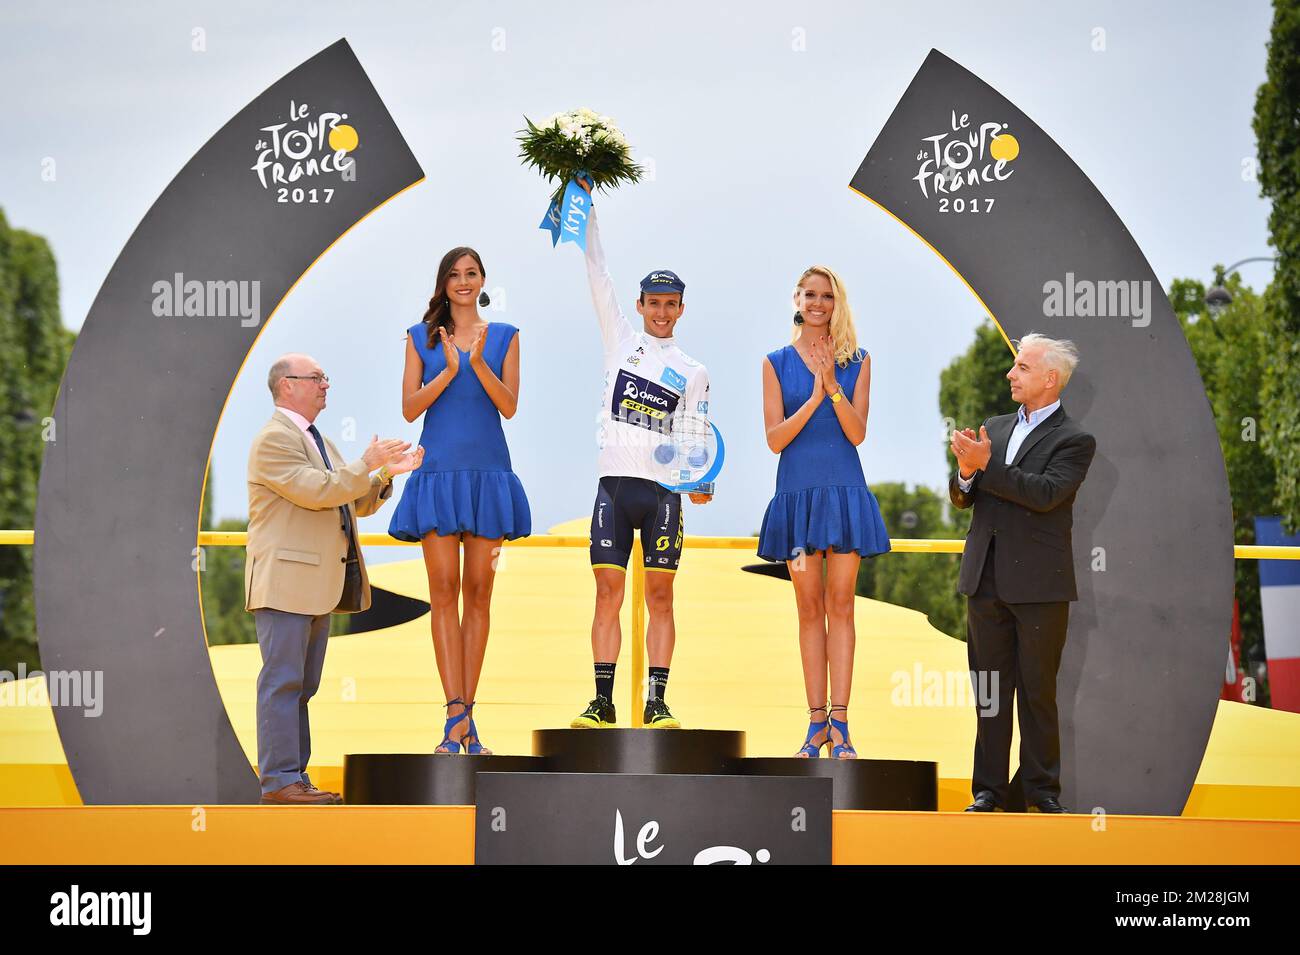 Great Britain Simon Yates of Orica - Scott celebrates on the podium in the white jersey for best young rider after the 104th edition of the Tour de France cycling race, in Paris, France, Sunday 23 July 2017. This year's Tour de France takes place from July first to July 23rd. BELGA PHOTO DAVID STOCKMAN  Stock Photo